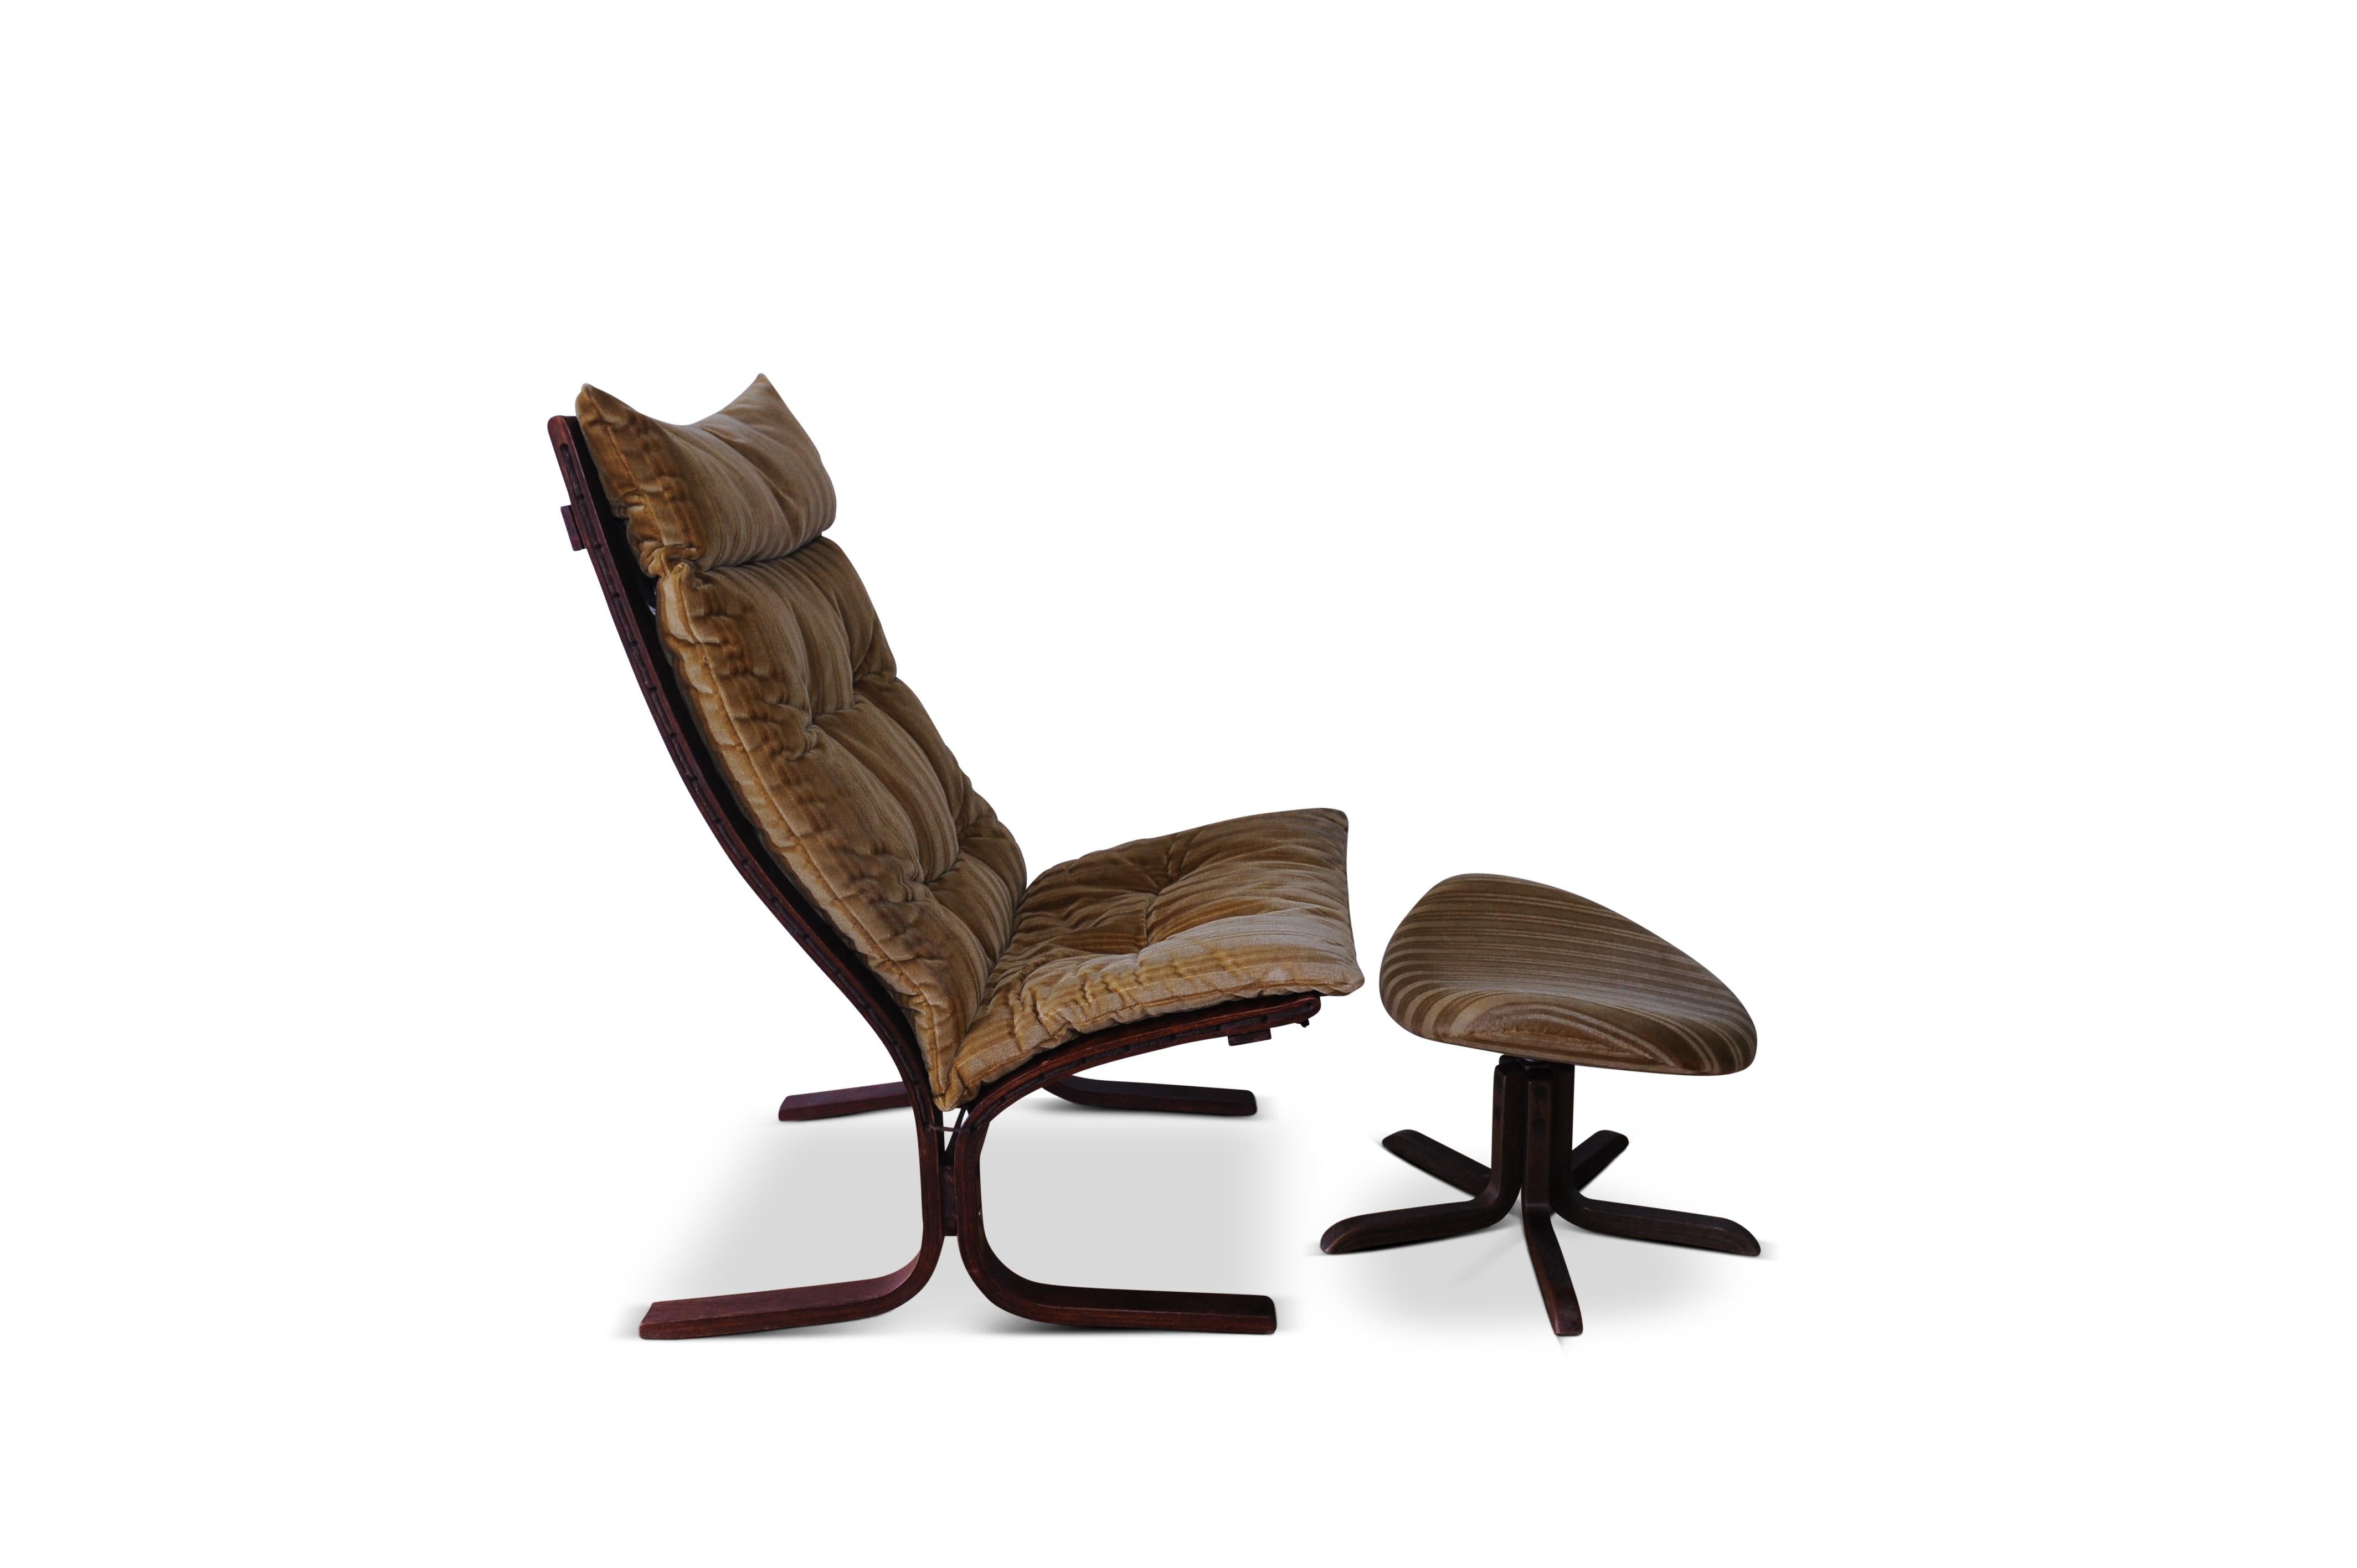 Westnofa Siesta bentwood lounge chair with matching footstool
designed by Ingmar Relling 

This easy chair was designed by Ingmar Relling for Westnofa, Norway, circa 1965. It features a reddish brown stained bentwood frame and golden velvet